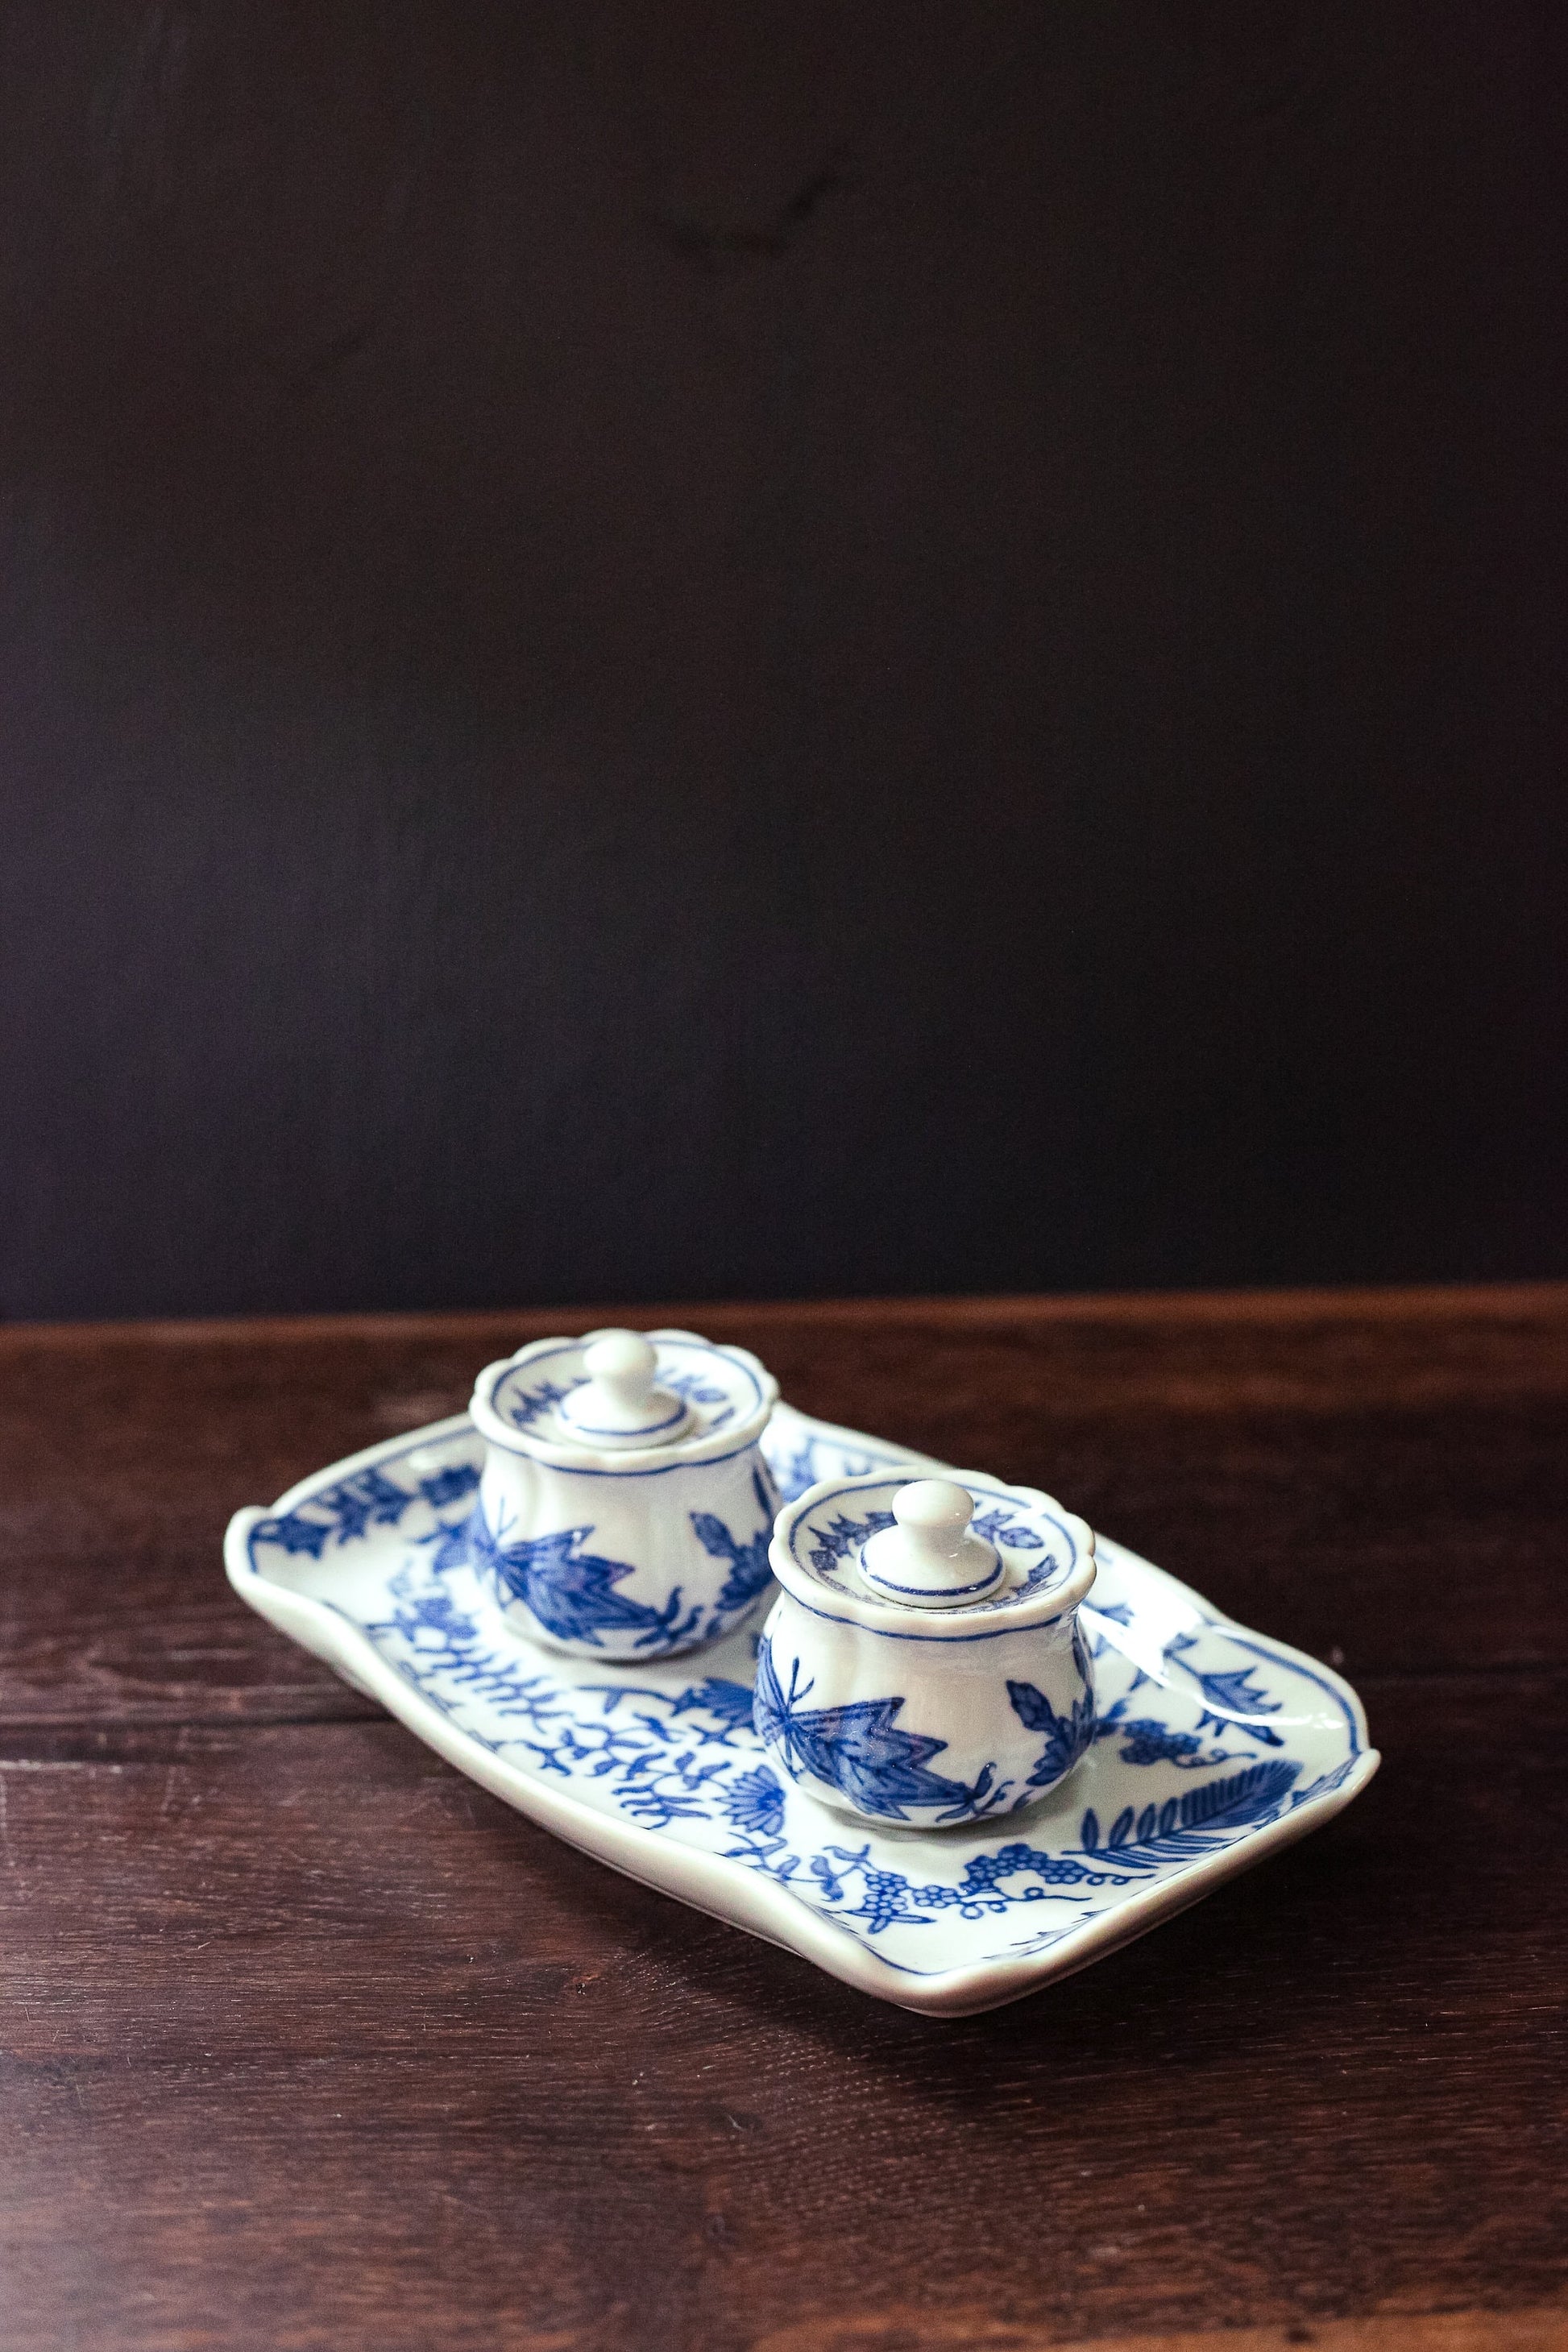 Blue Onion Ceramic Salt Pepper Serving Tray with Containers & Lids - Vintage Blue White Porcelain Tableware